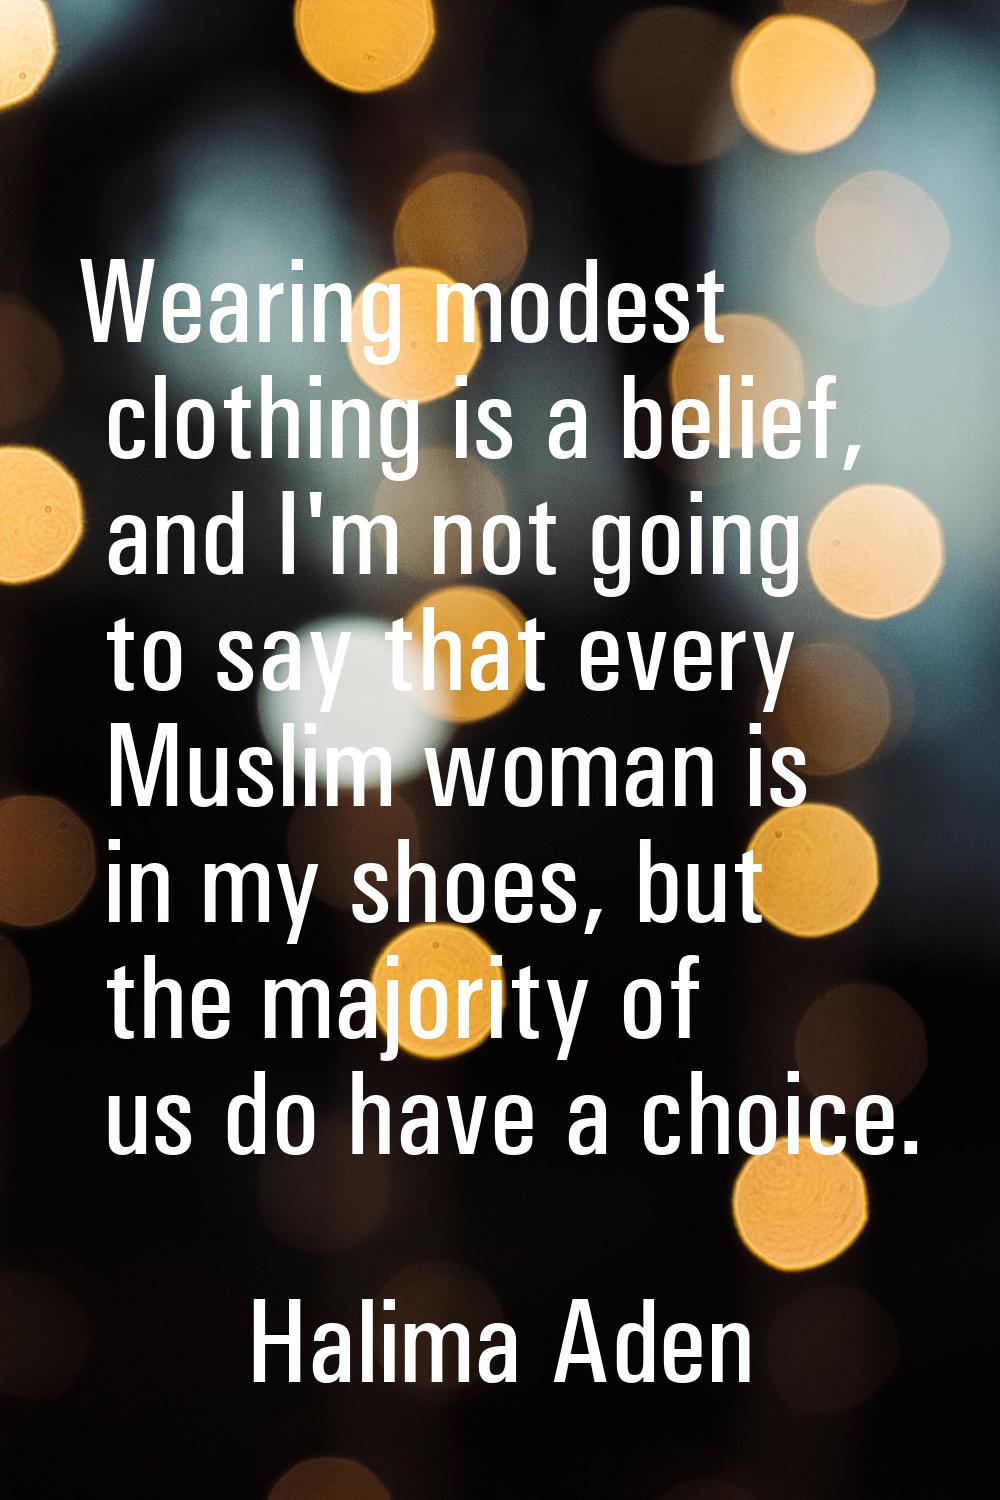 Wearing modest clothing is a belief, and I'm not going to say that every Muslim woman is in my shoe